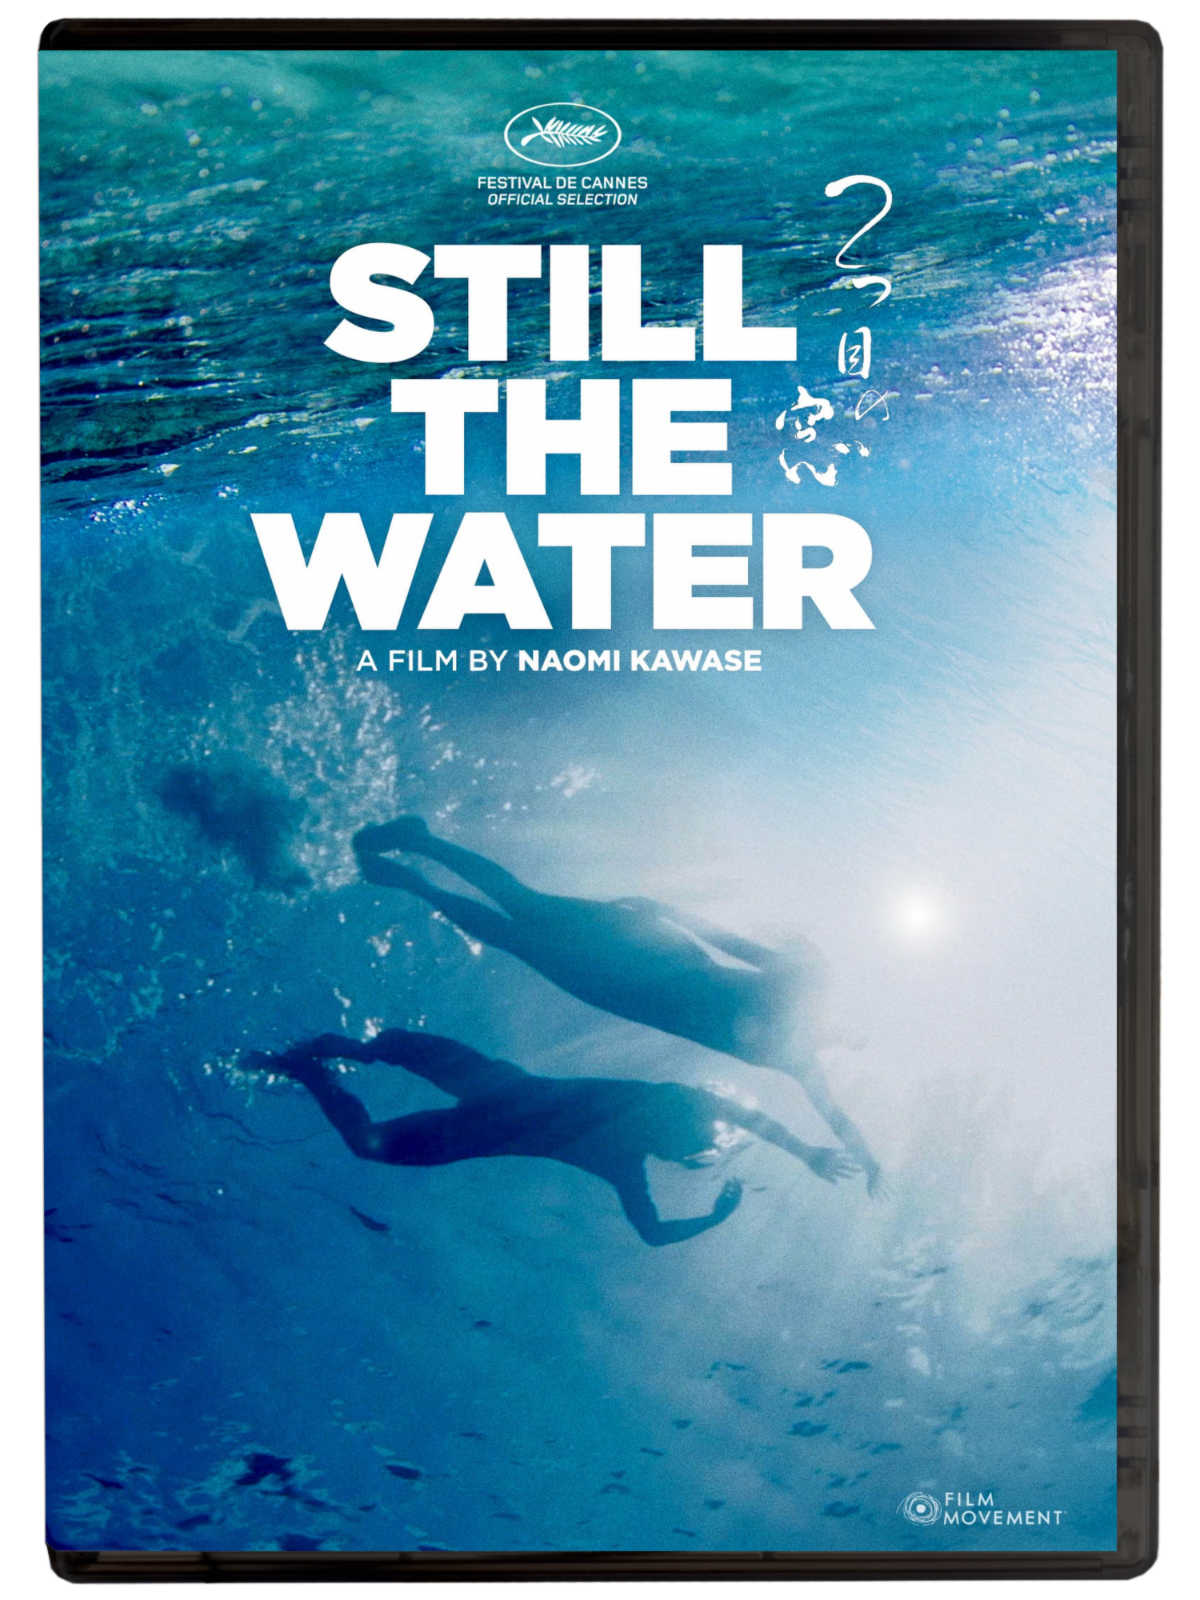 The new DVD release of Still the Water, written and directed by Naomi Kawase, is a beautiful and moving Japanese coming-of-age story.